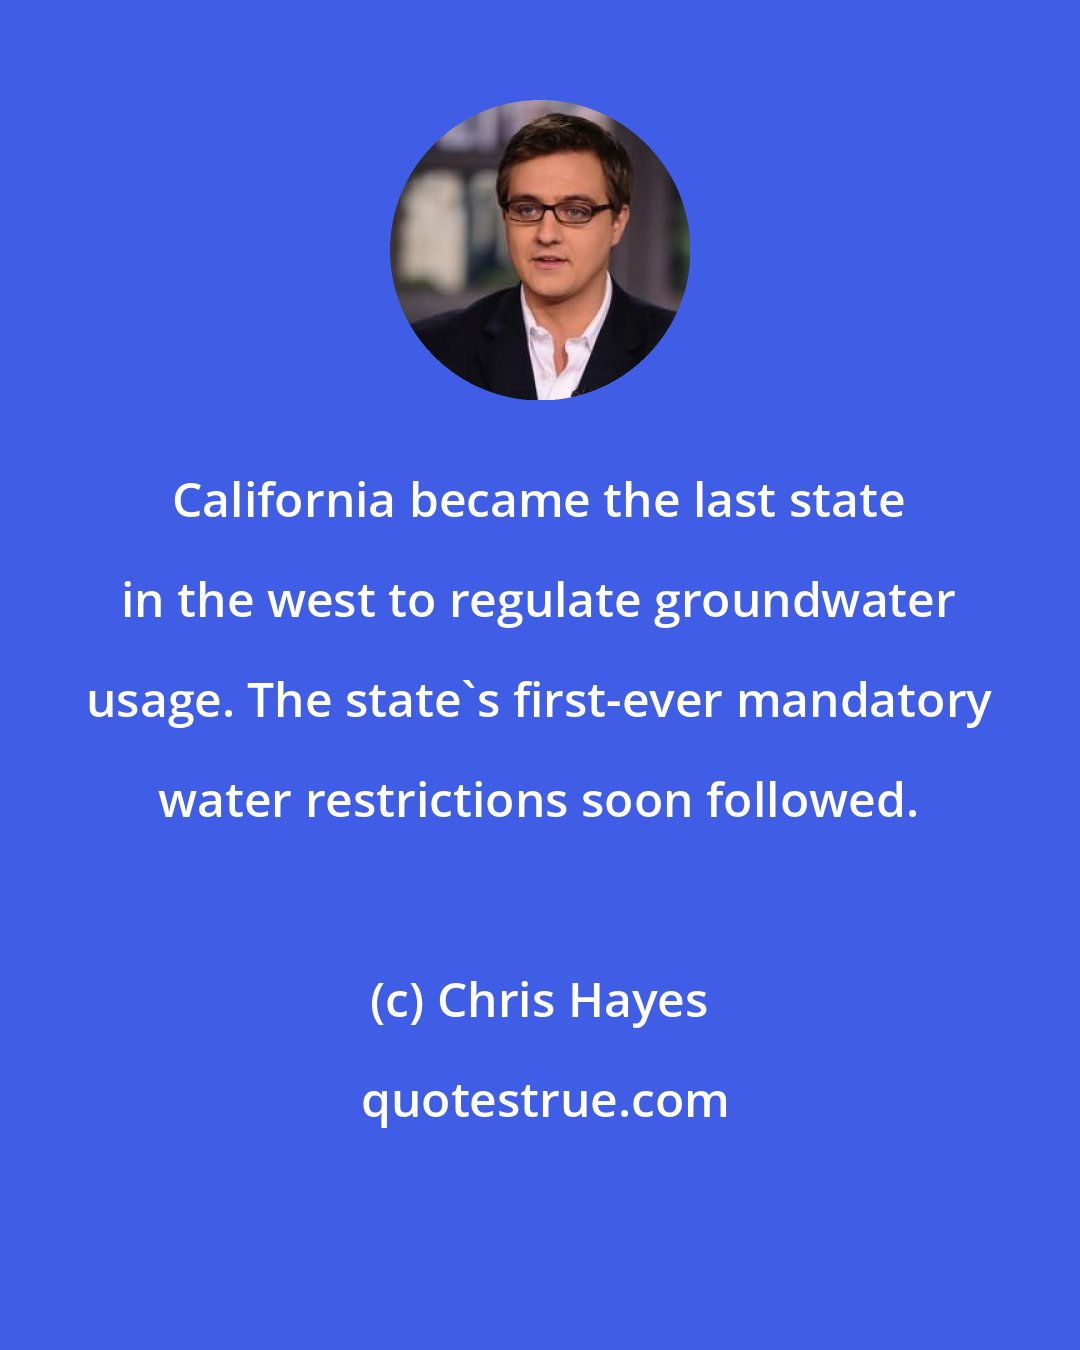 Chris Hayes: California became the last state in the west to regulate groundwater usage. The state`s first-ever mandatory water restrictions soon followed.